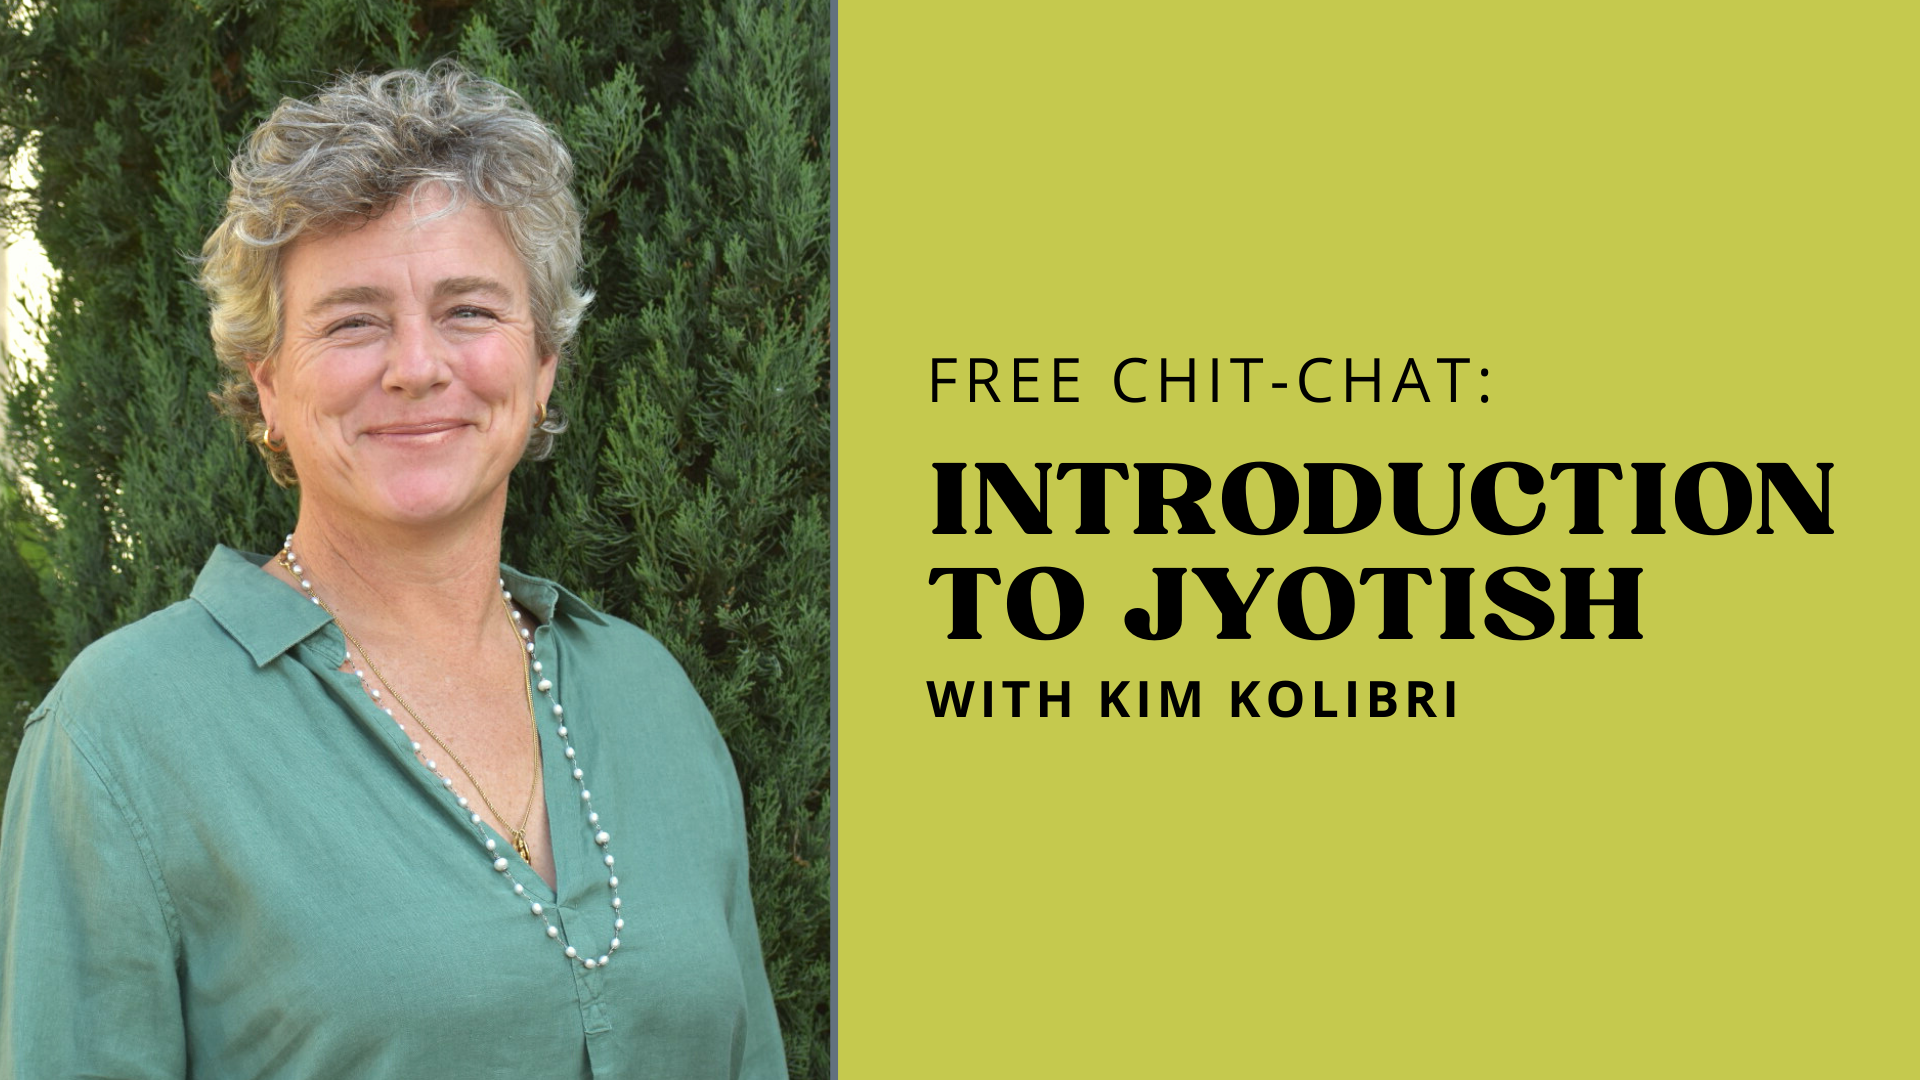 Free Chit-chat at Adeline Yoga Online Introduction to Jyotish